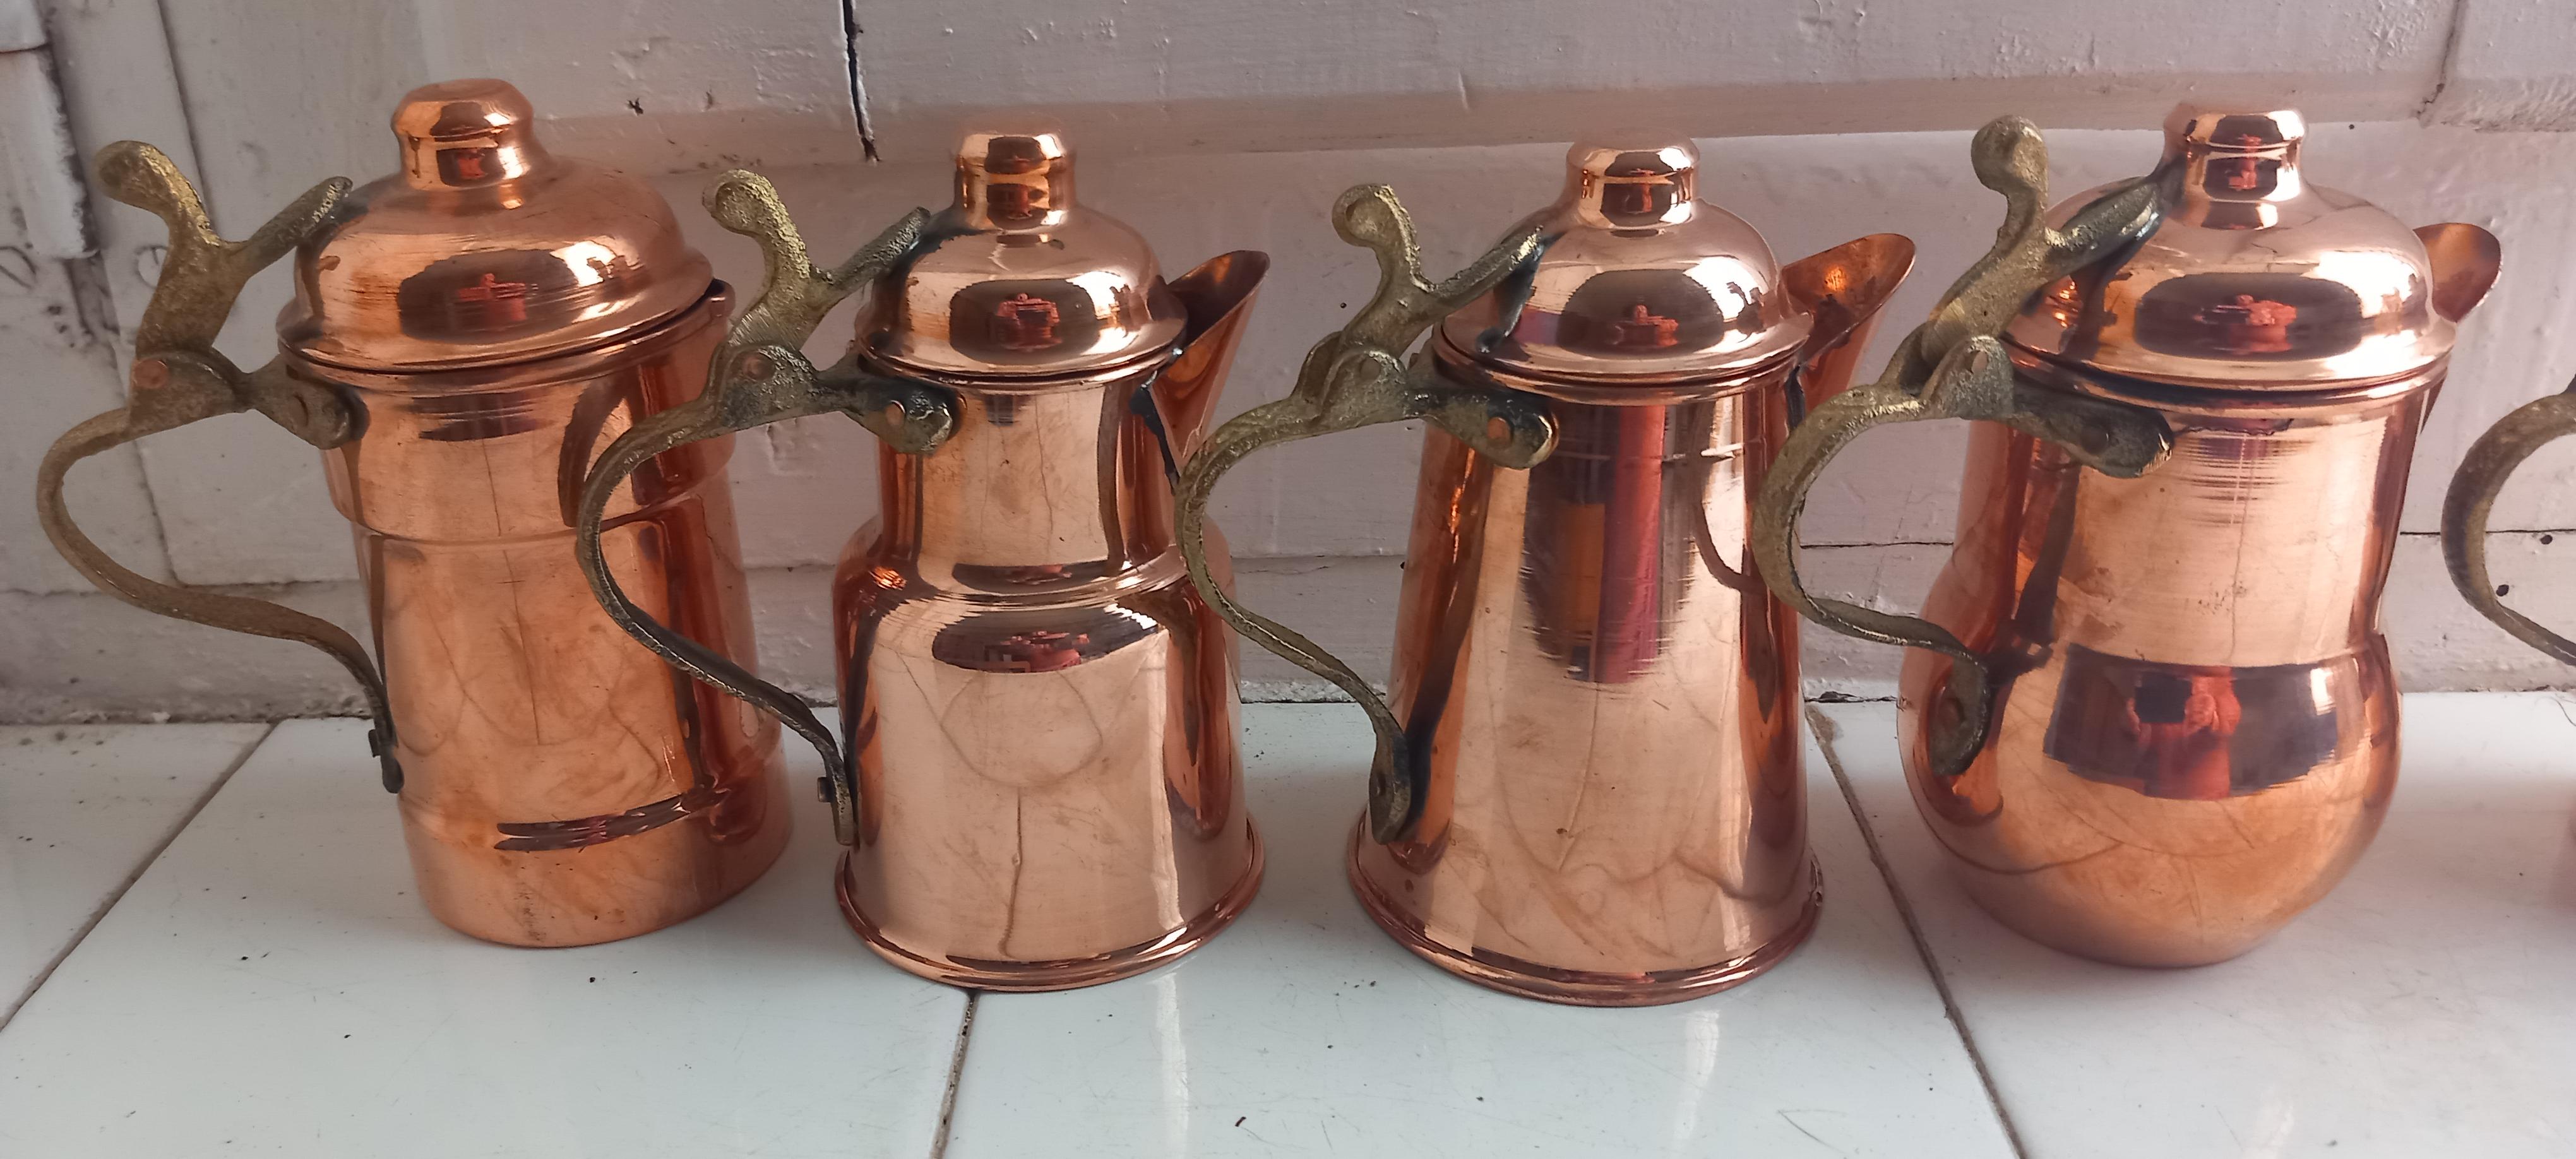  Copper Kitchen Decoration Vintage Coffee Pots Lot of 5 Diferent Design In Good Condition For Sale In Mombuey, Zamora